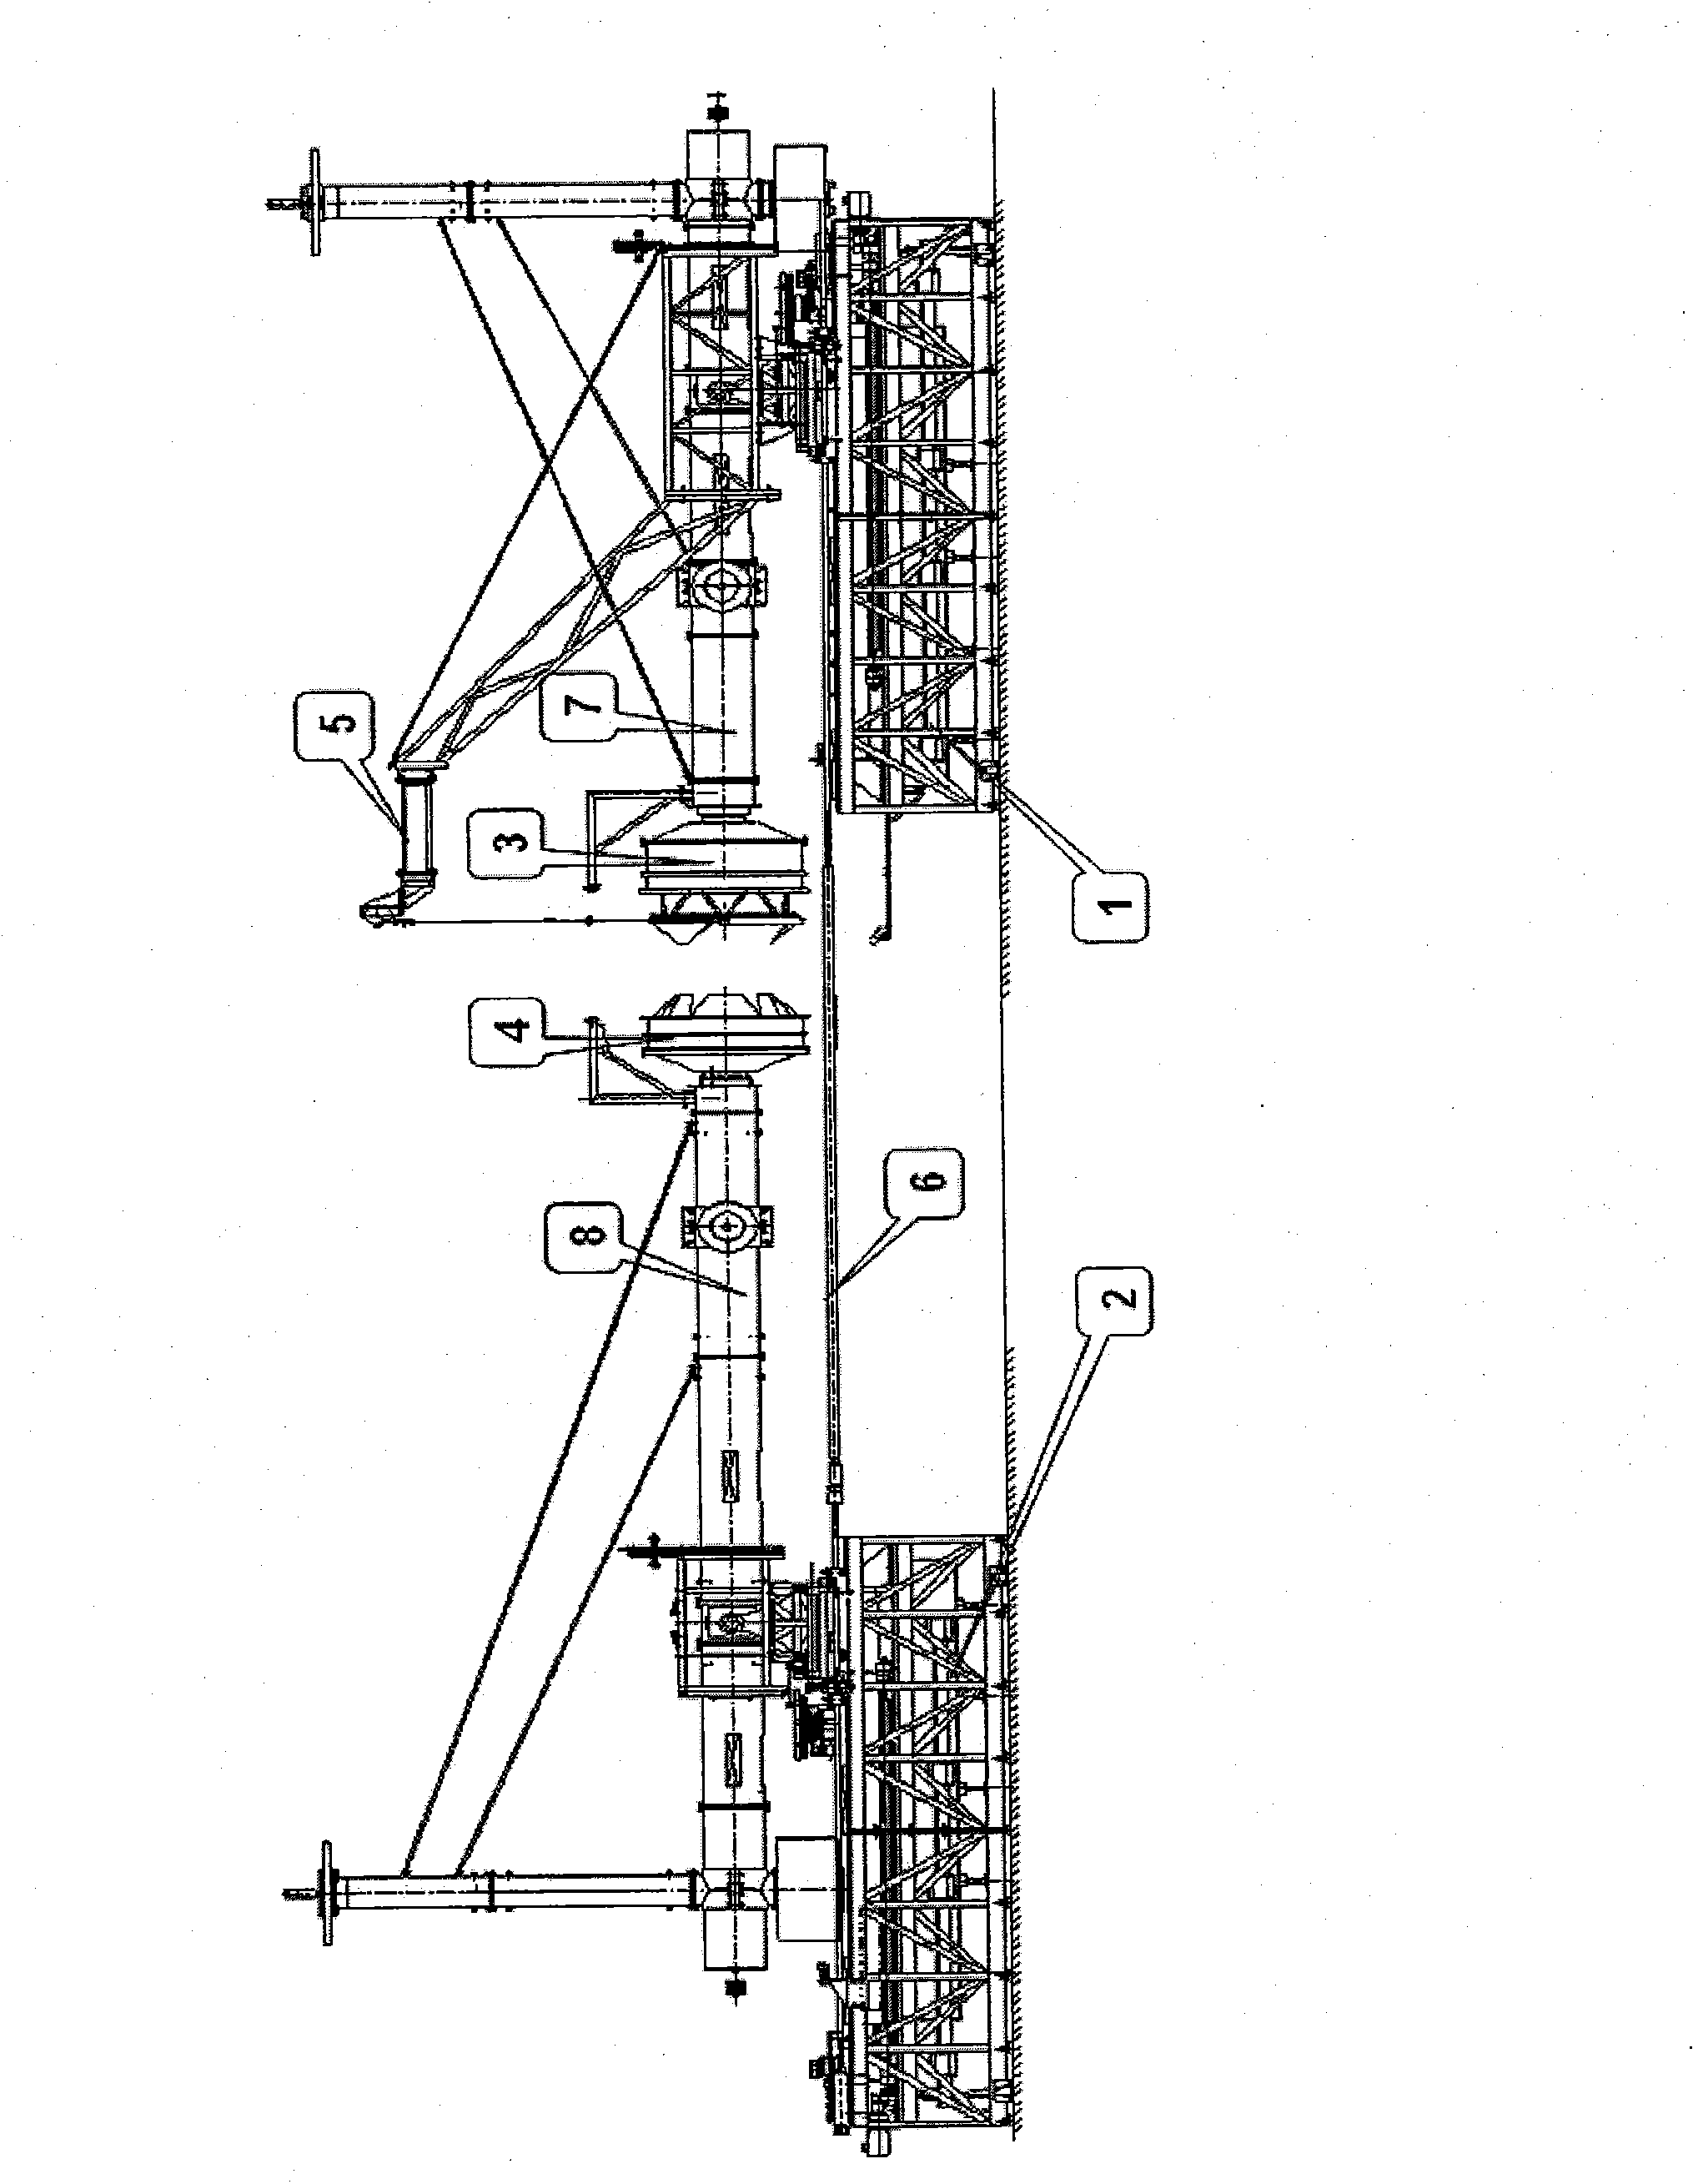 Buffer testbed of space docking mechanism